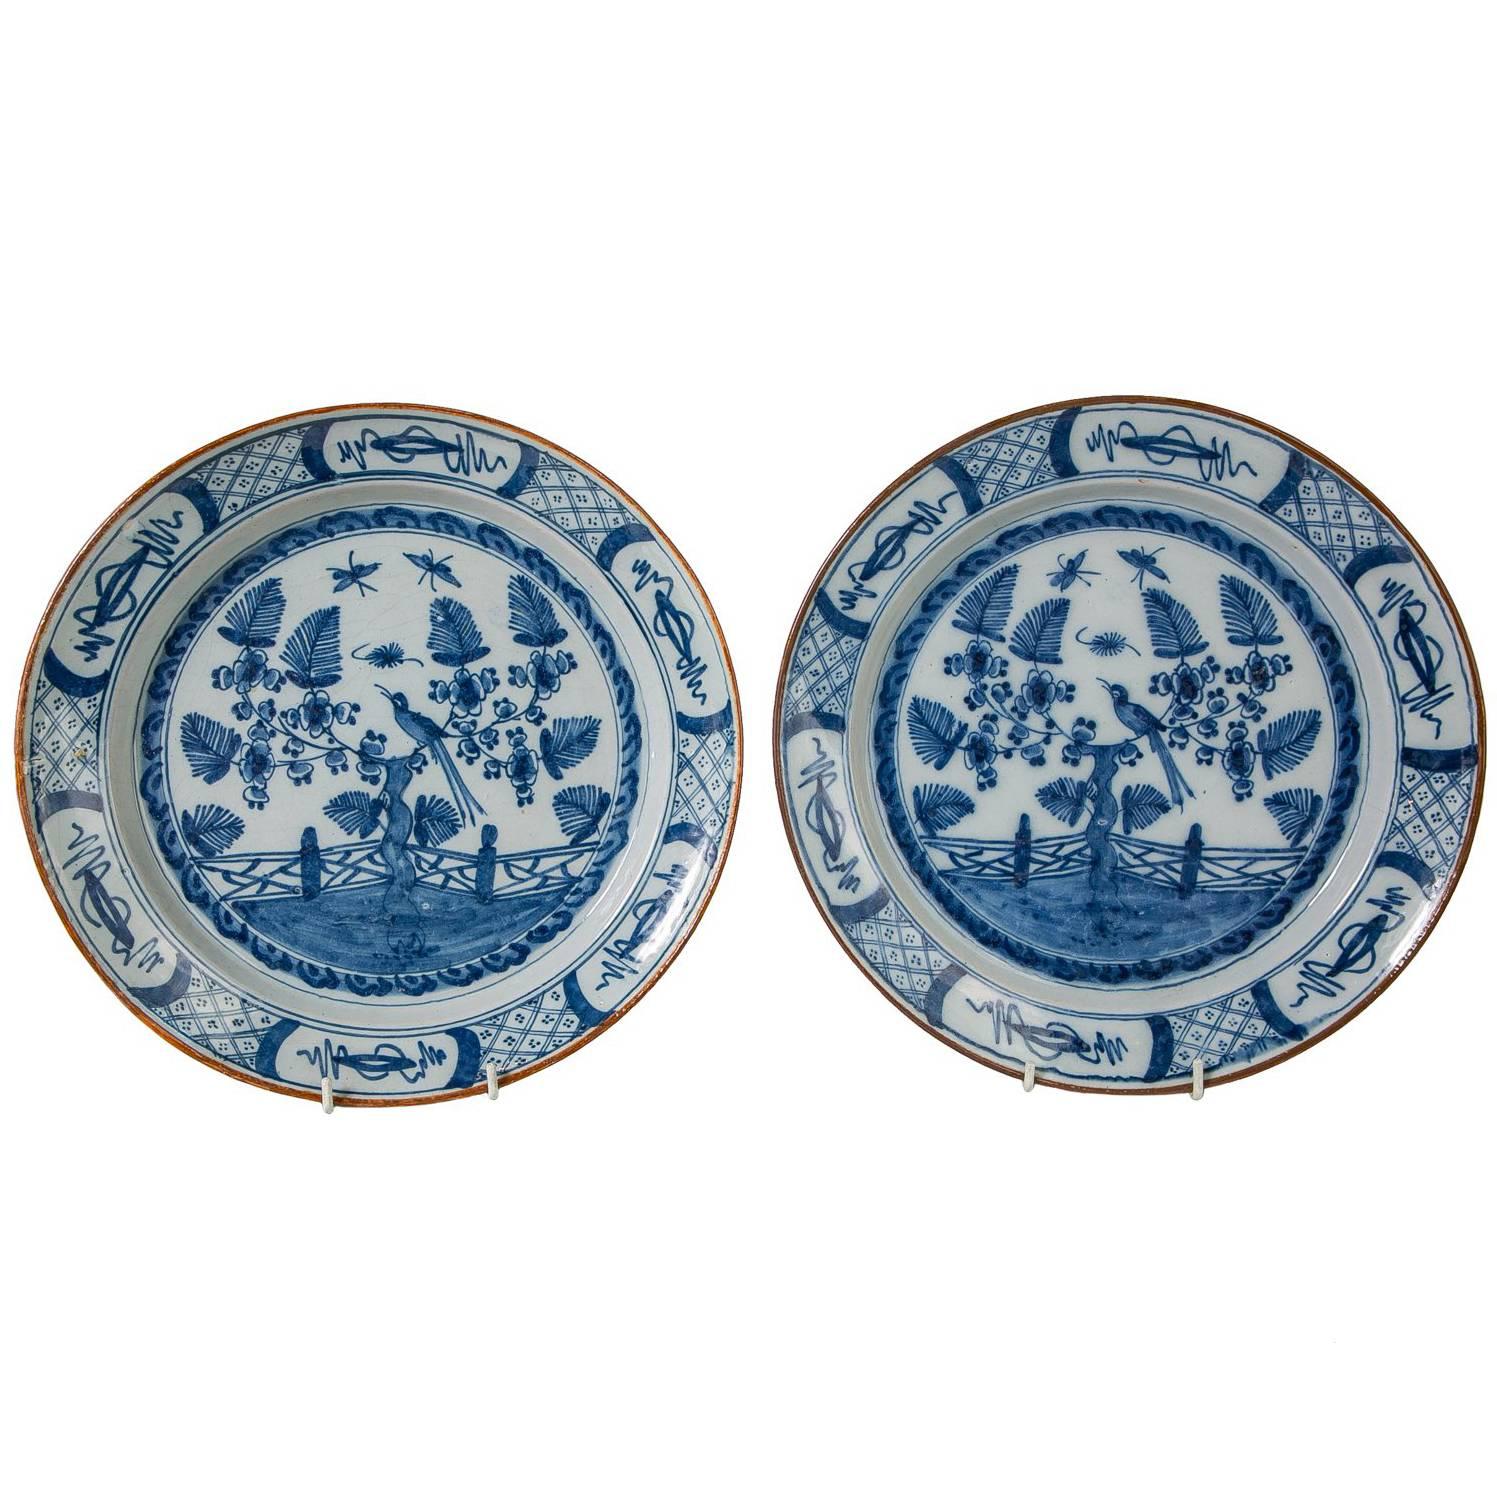 Pair Delft Blue and White Chargers